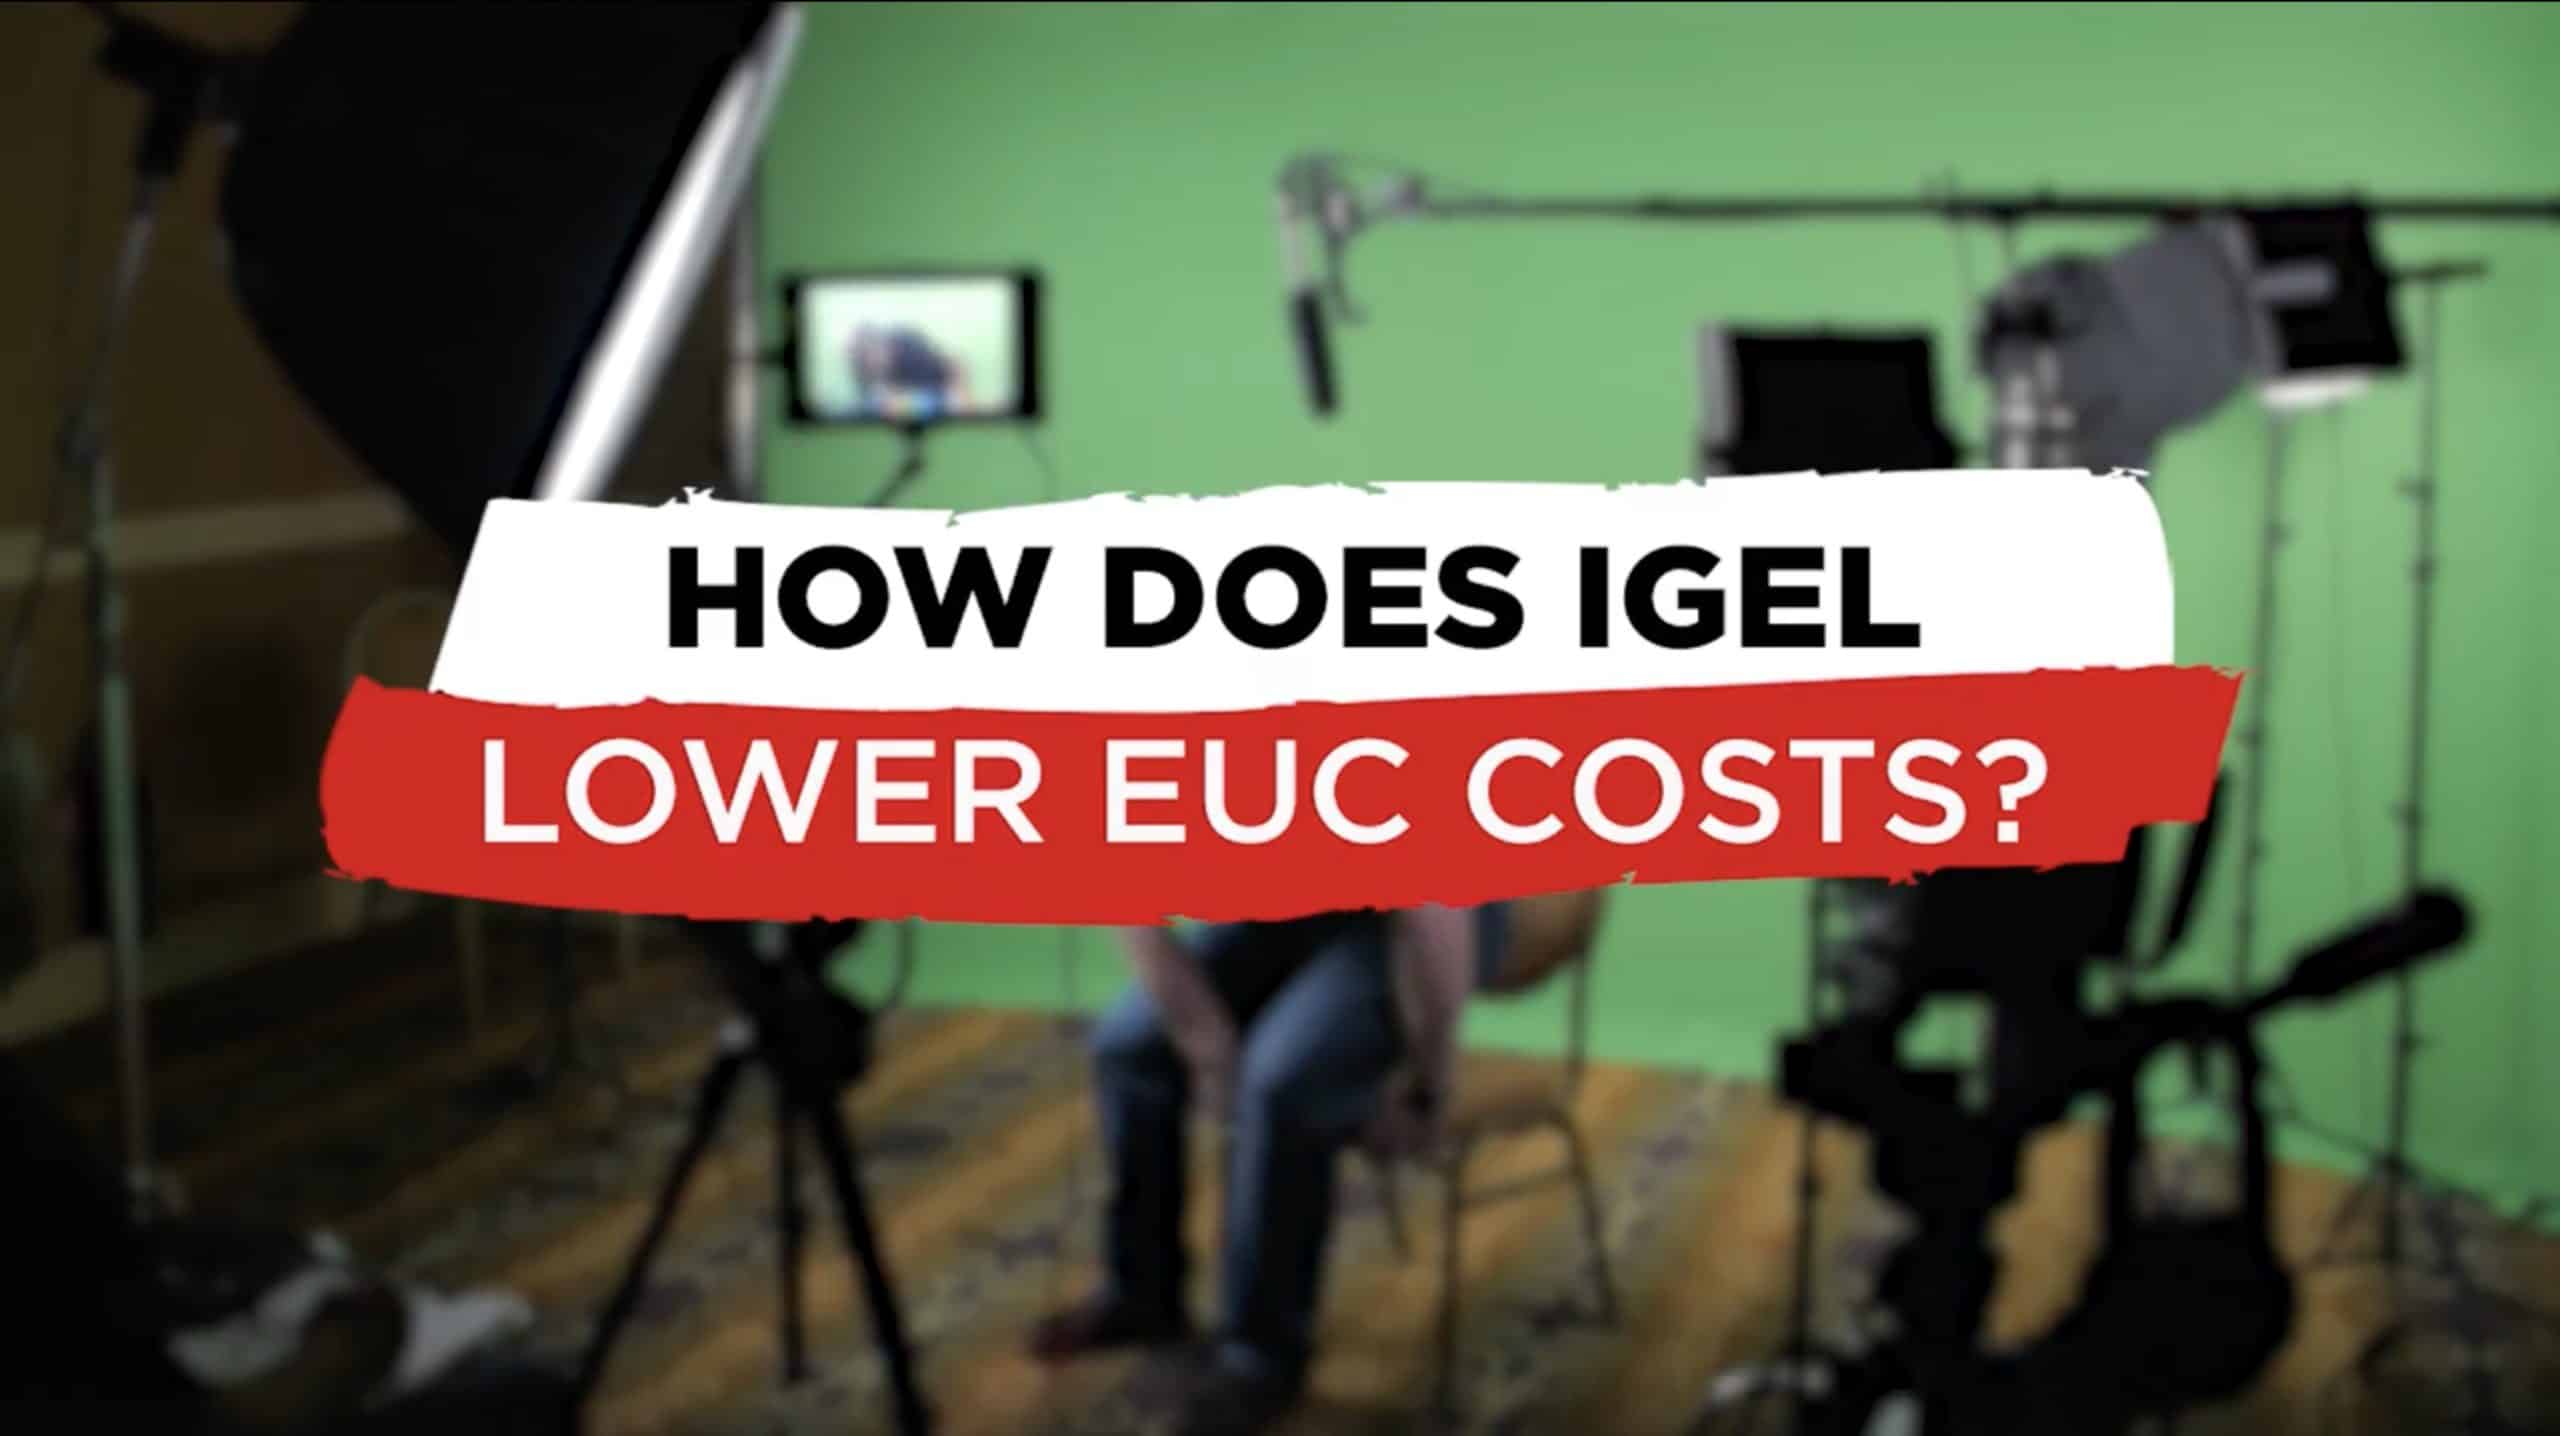 How Does IGEL Lower EUC Costs